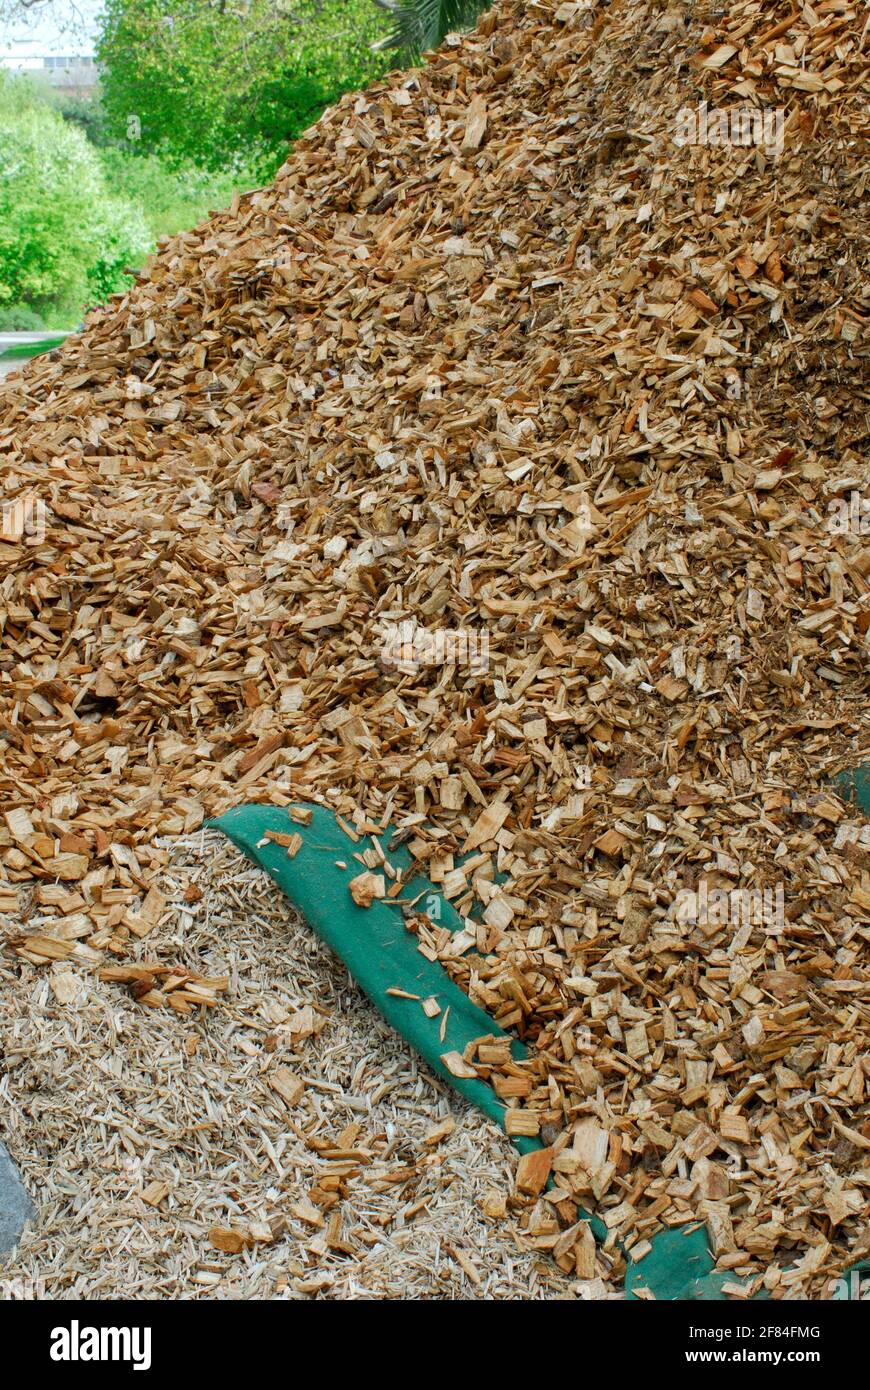 Wood chips, ground cover, mulch, fuel, combustible material Stock Photo